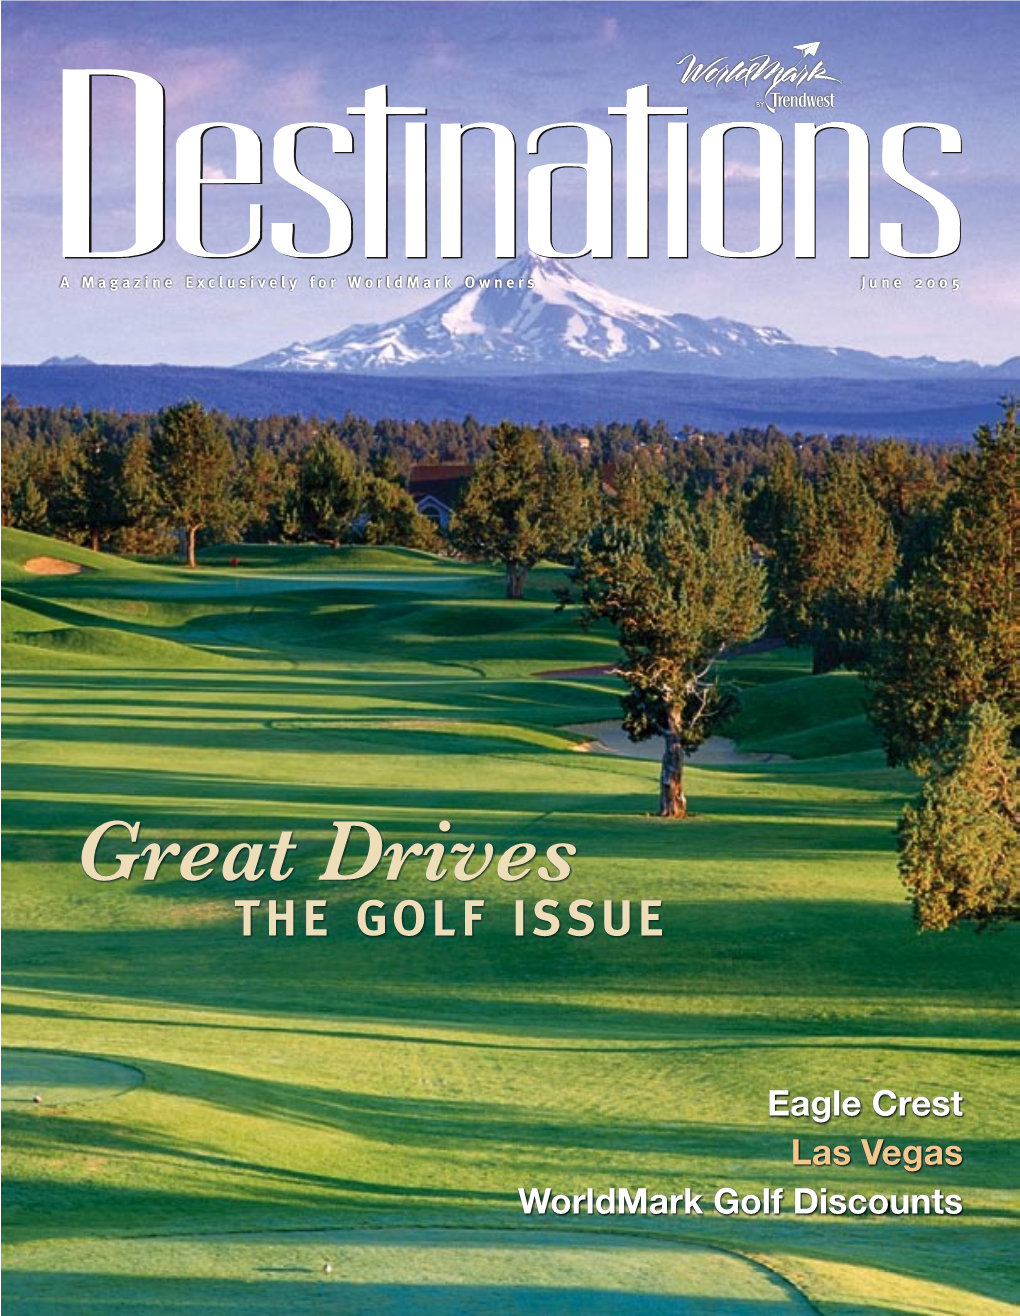 Great Drives the GOLF ISSUE